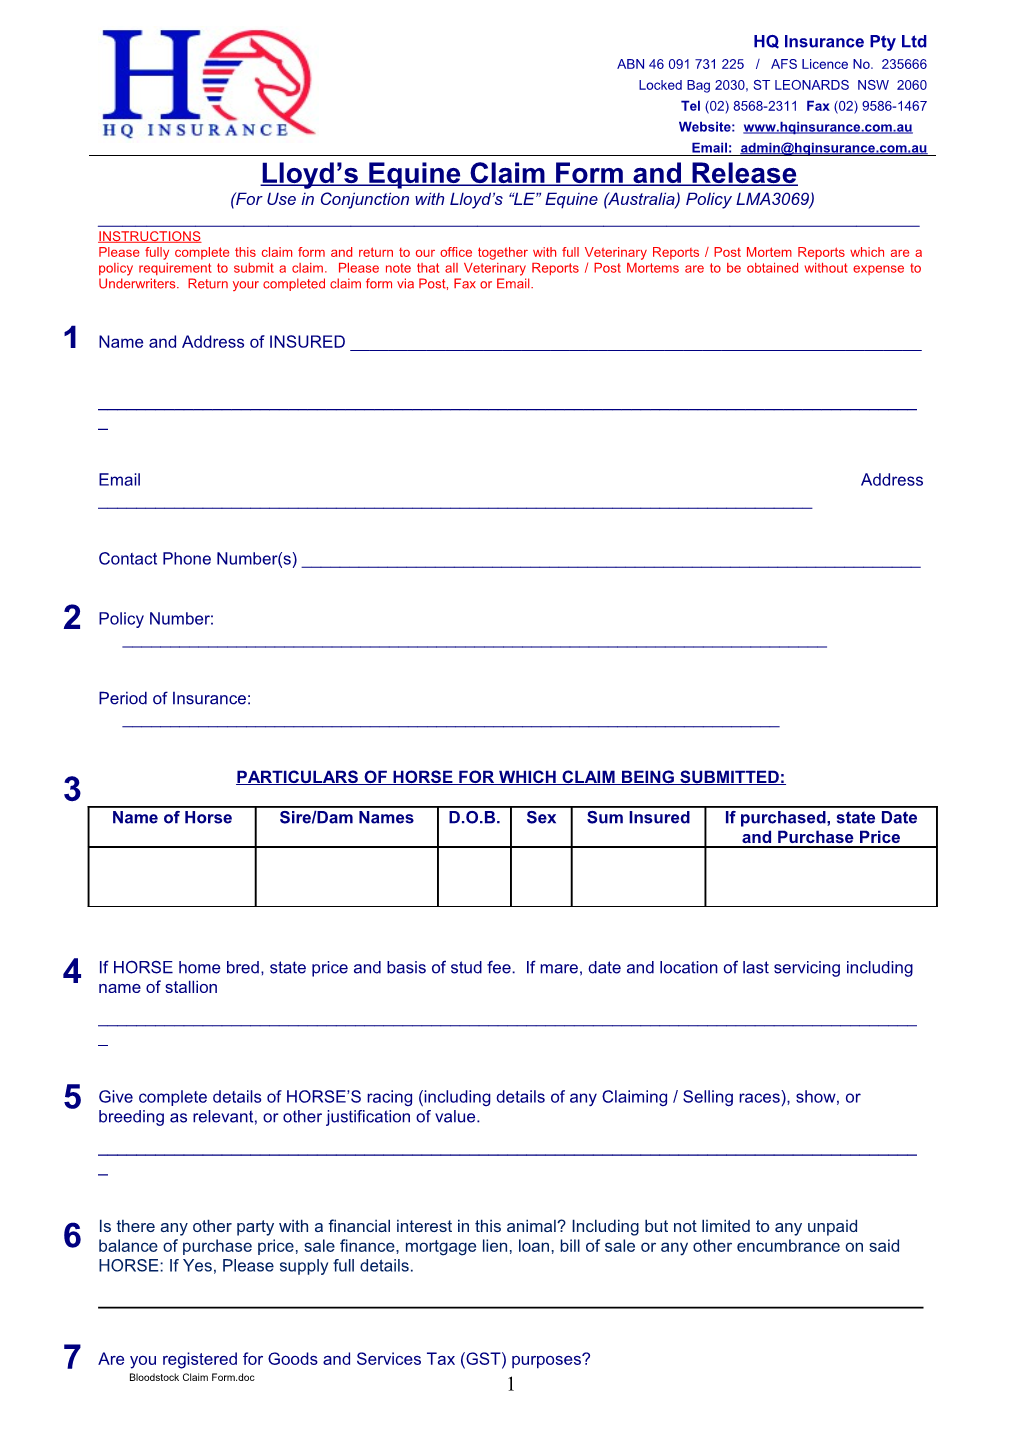 Lloyd S Equine Claim Form and Release